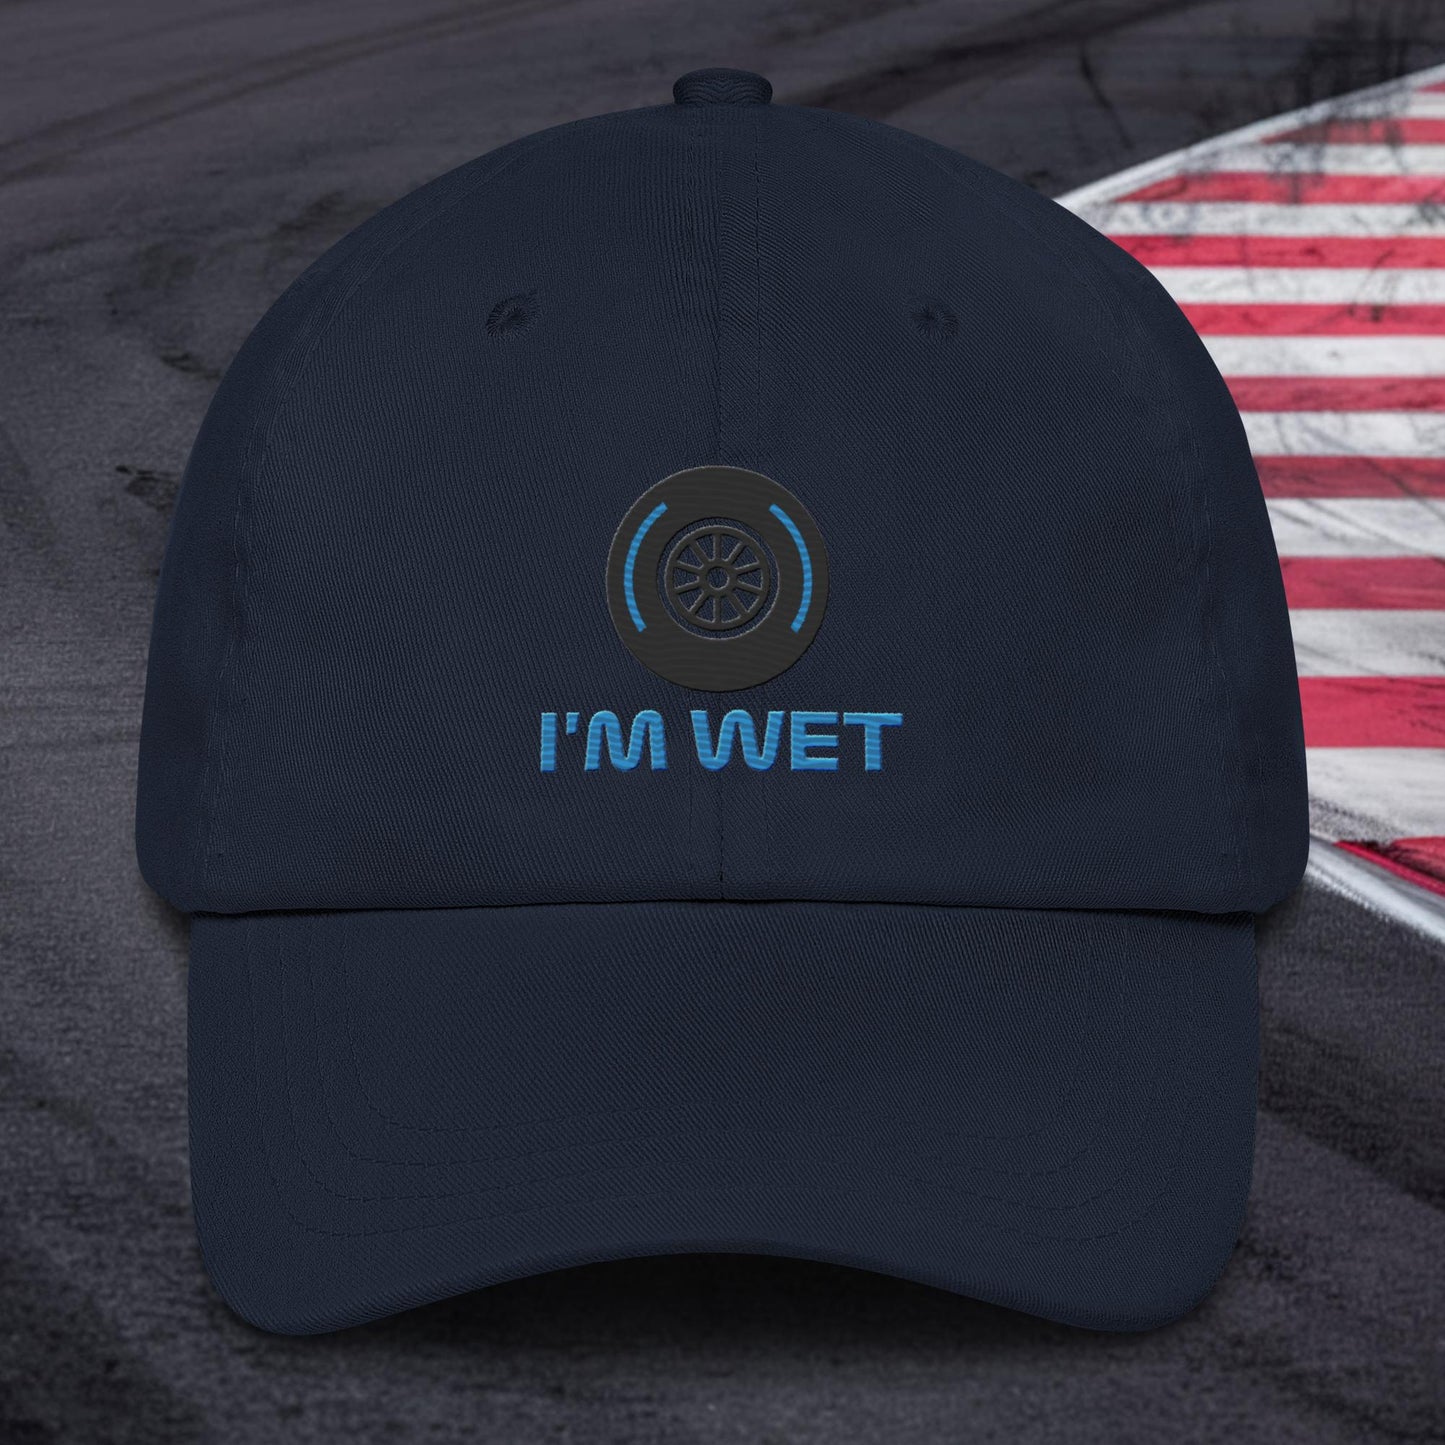 I'm Wet Tyres Funny F1 Dad hat Next Cult Brand